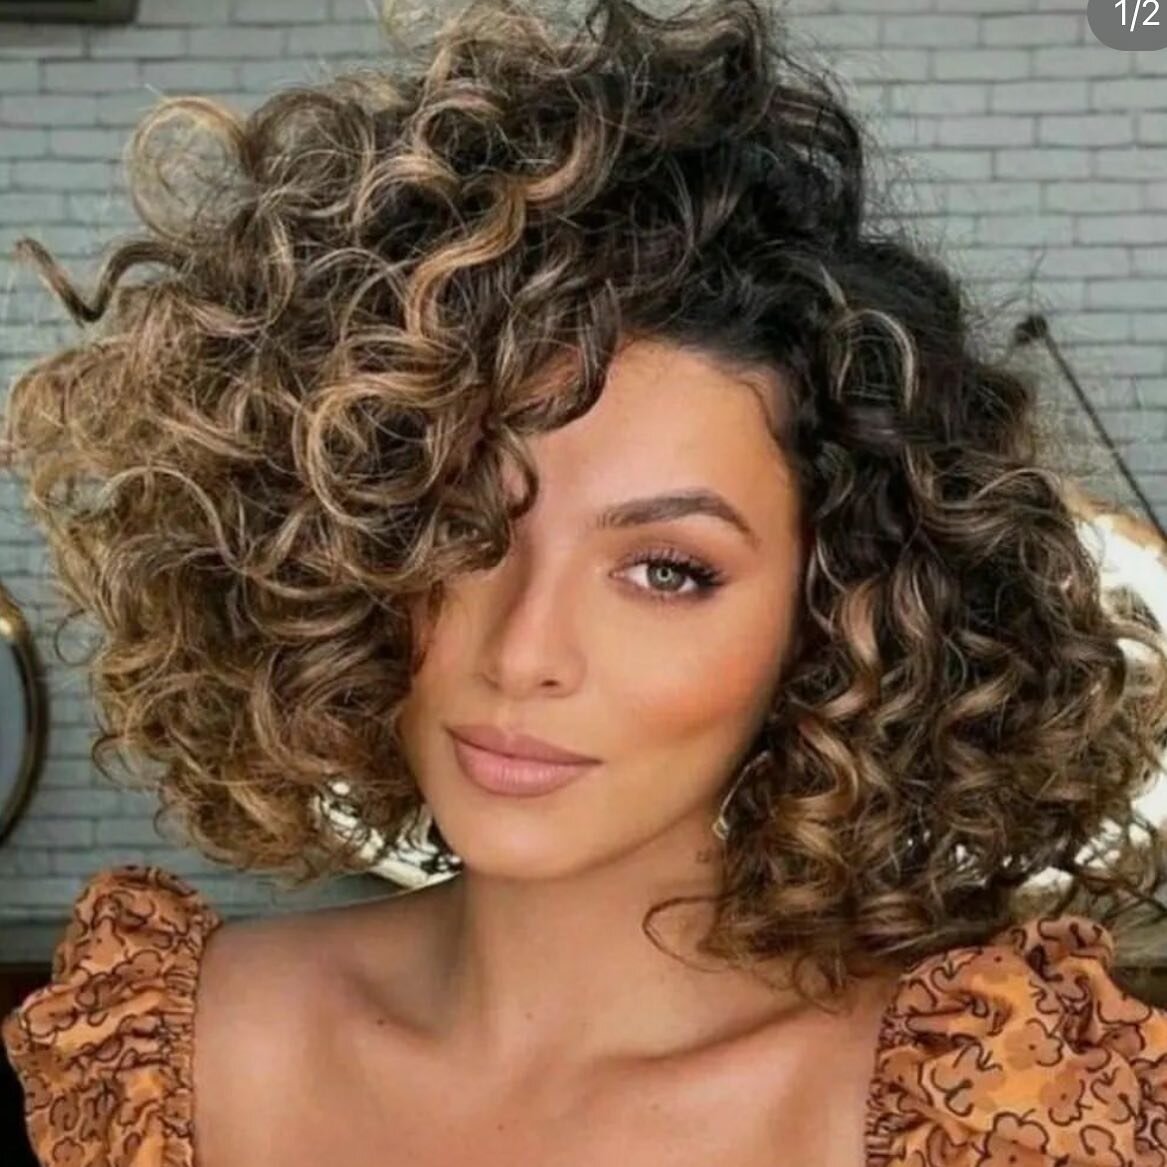 The shape and color are just perfect😍 
Hair by: @cachossbrilhantes 

#texpertcollective #texturedhairelevated #curlyhair #curlyhairstyles #highlights